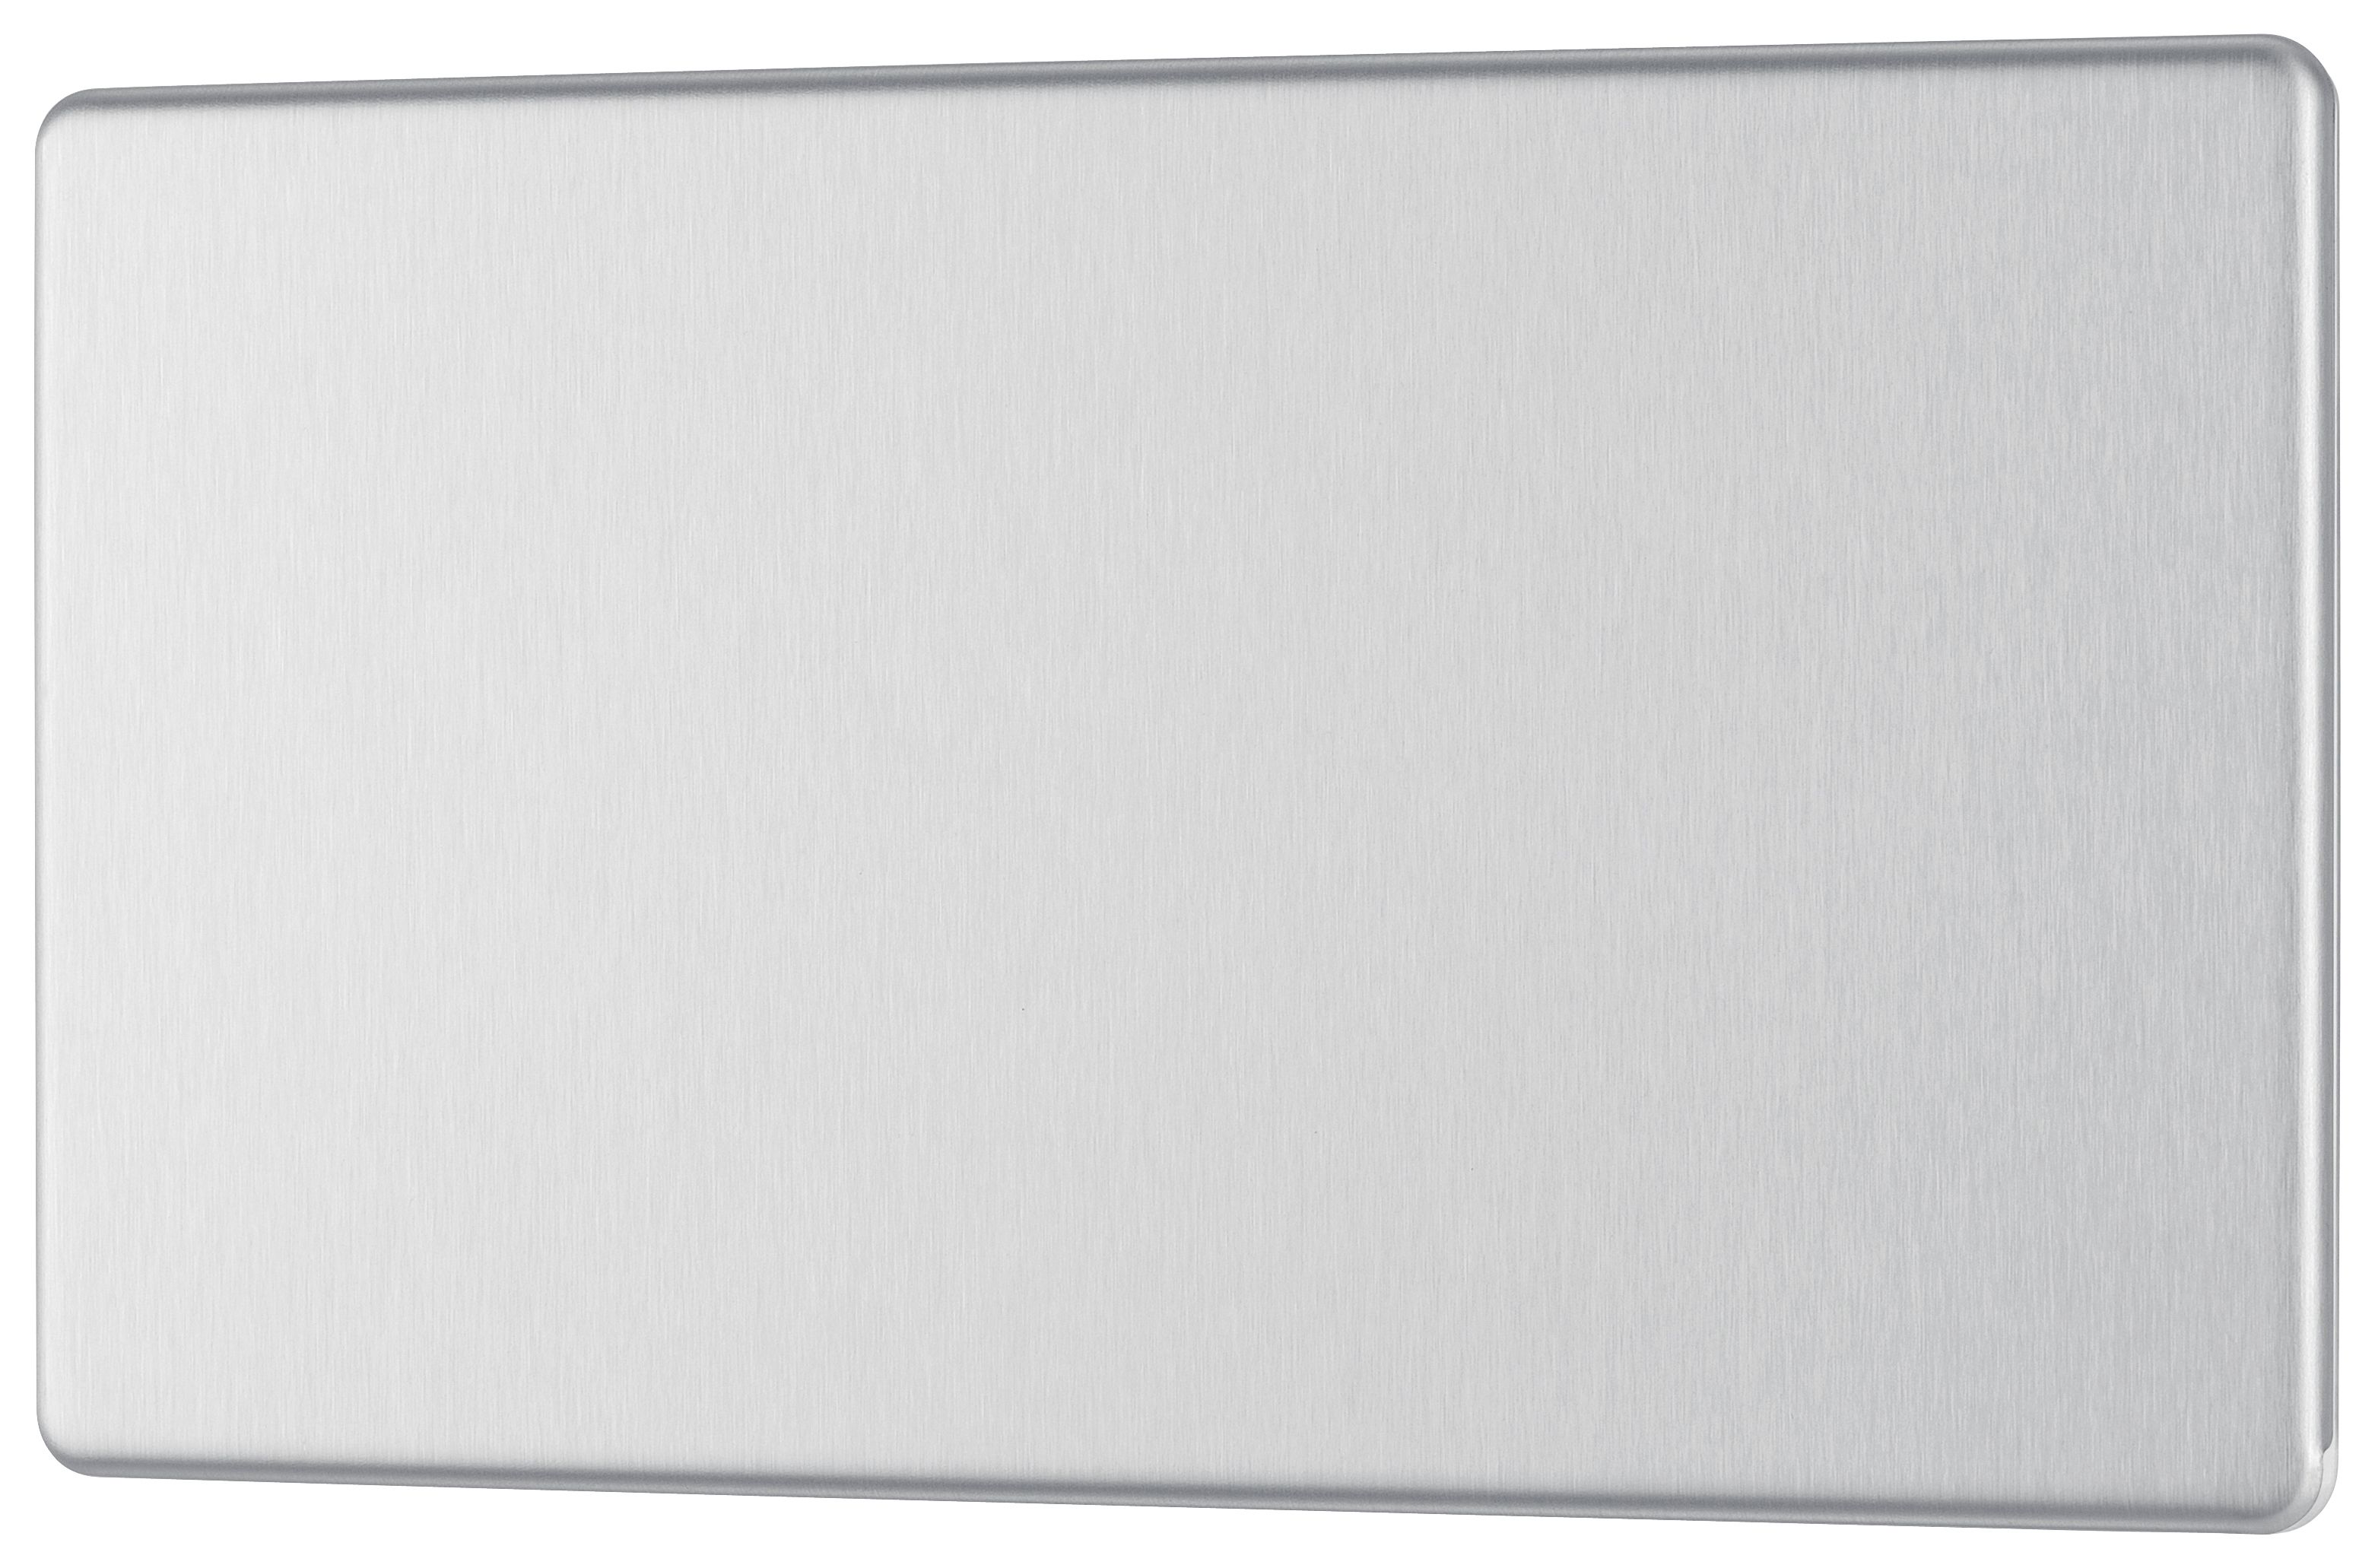 GoodHome Brushed Steel 2 gang Double Screwless Blanking plate